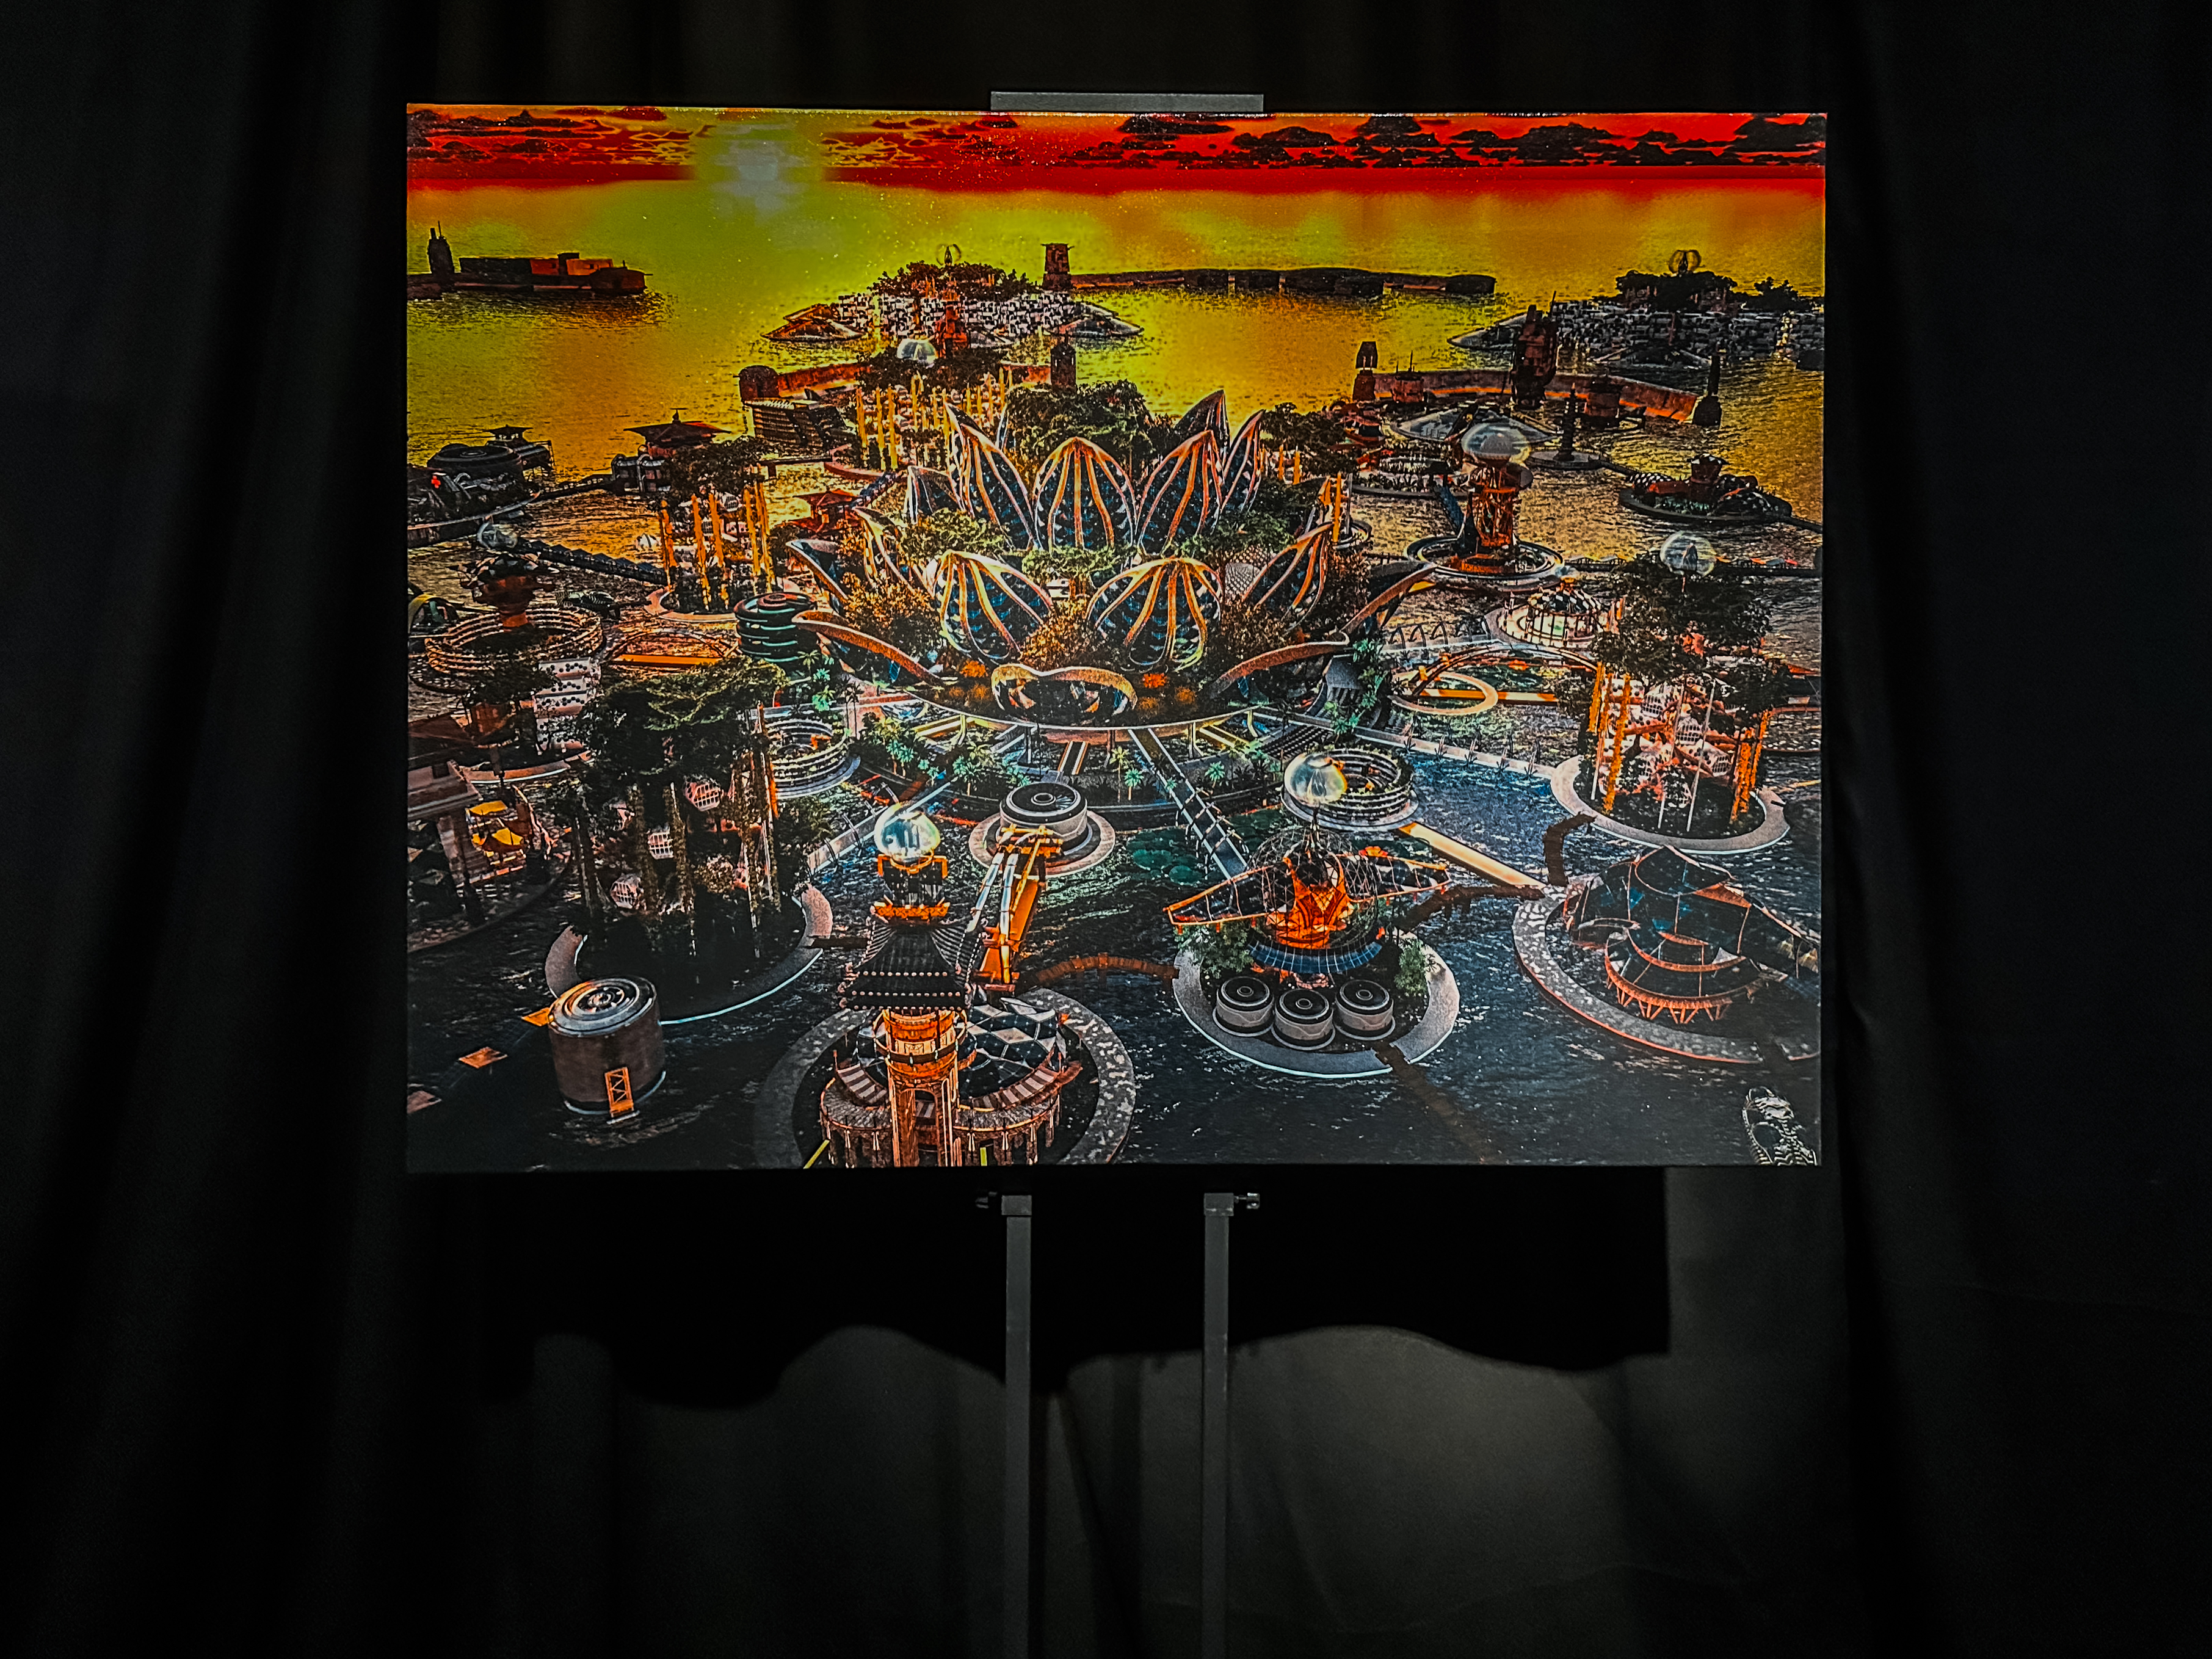 Mid shot of a painting depicting the dystopian city of “Aquasia” as part of the MeshMinds 3.0: ArtxTechforGood exhibition 